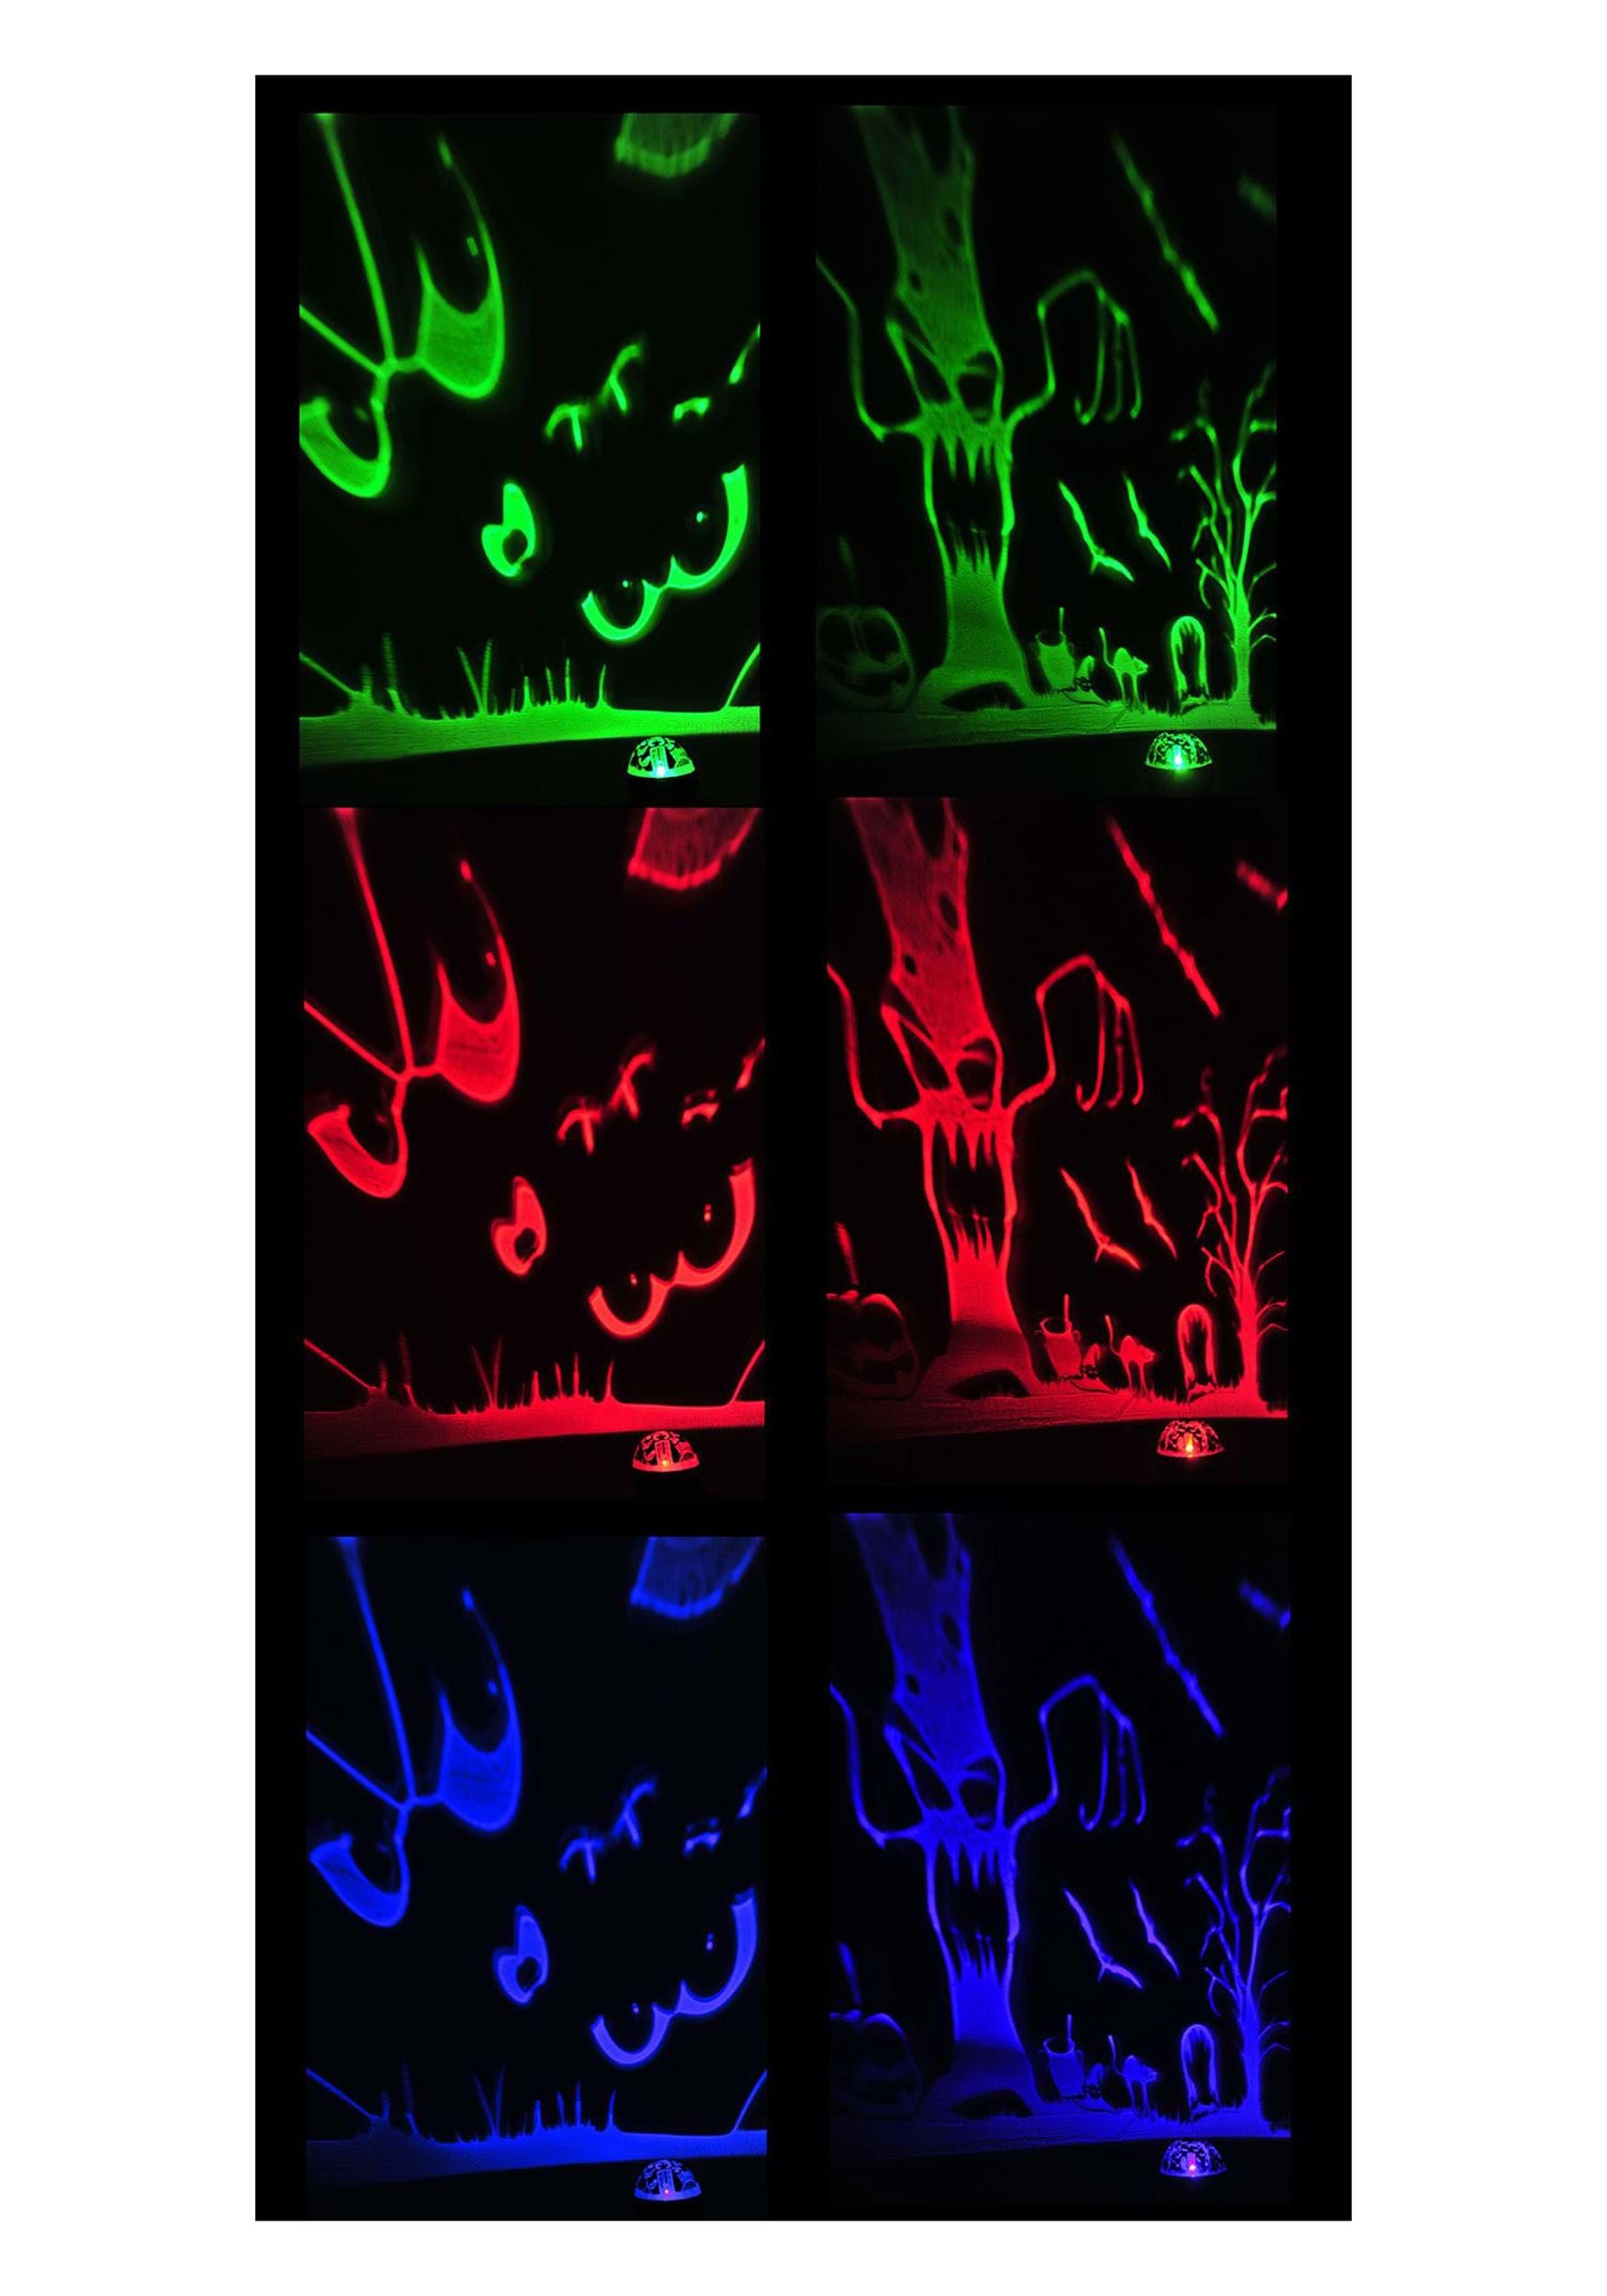 Cemetery Scene Party Projector Prop